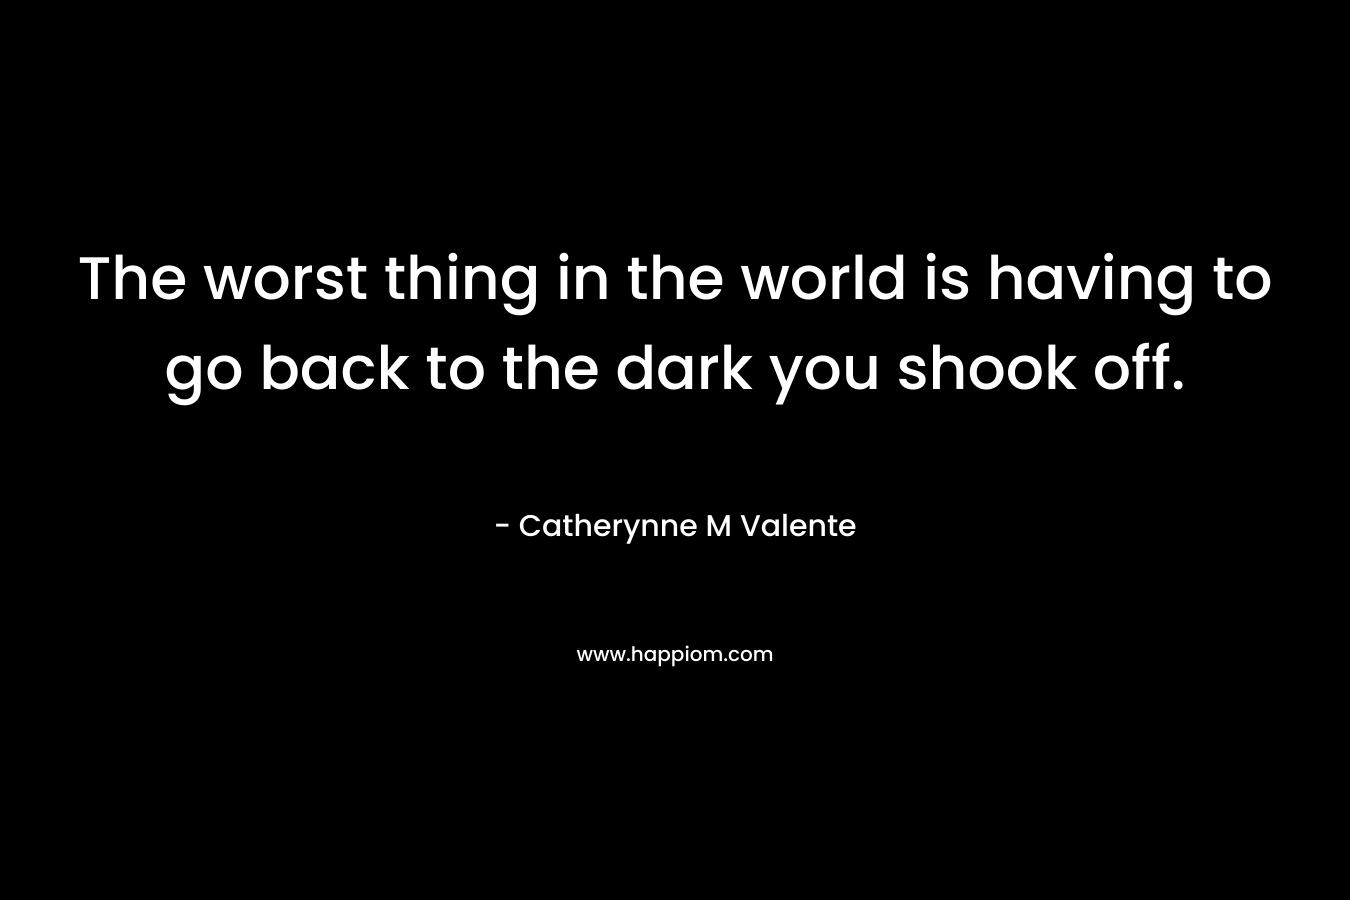 The worst thing in the world is having to go back to the dark you shook off.